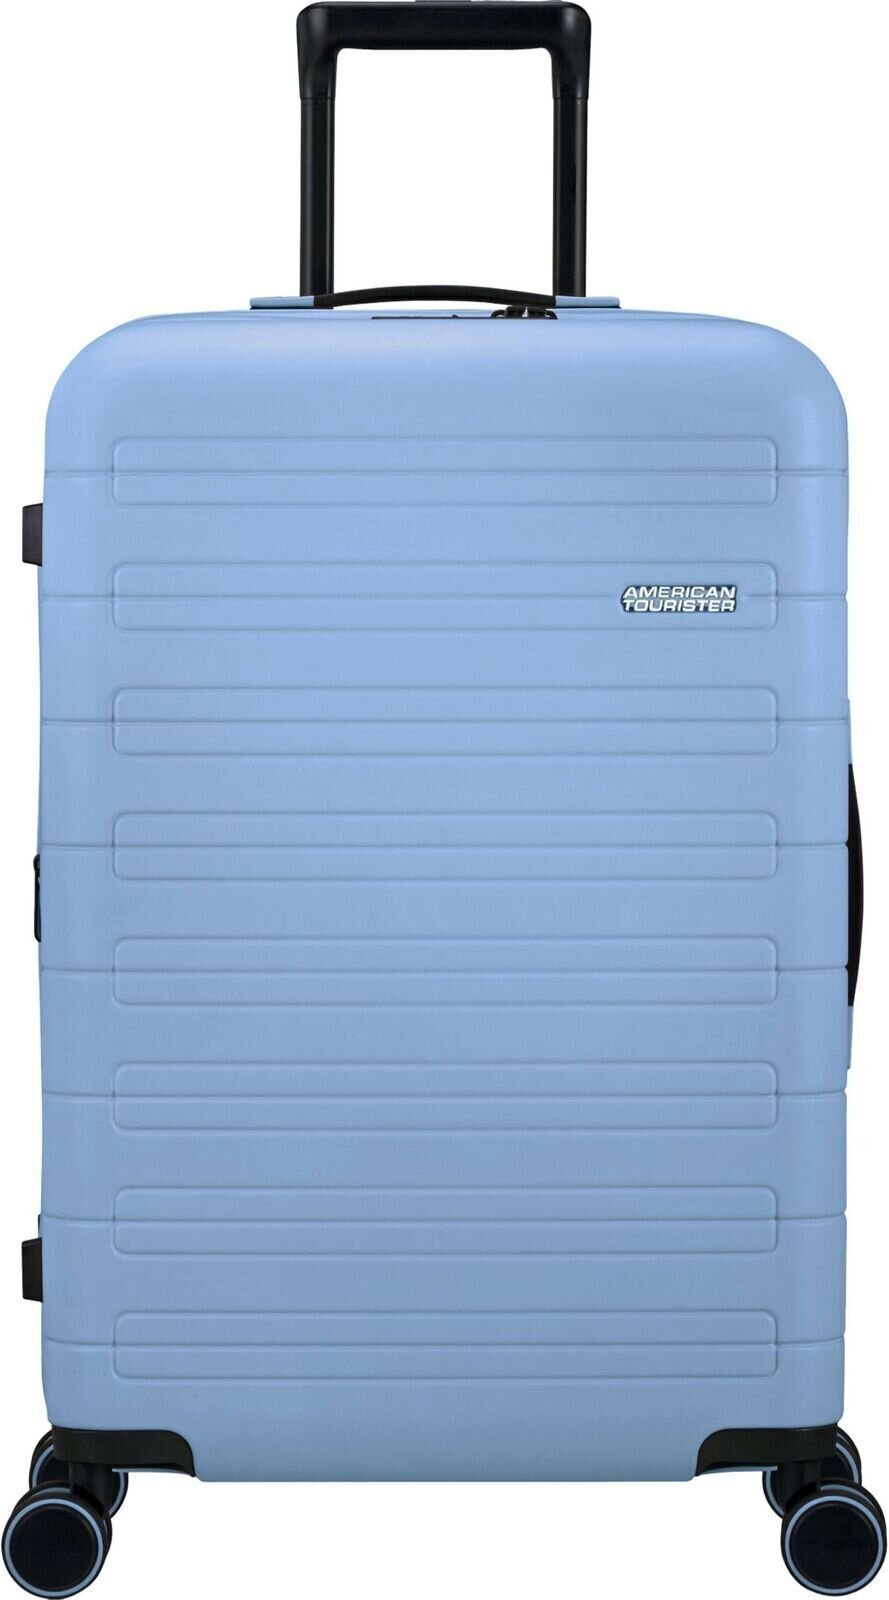 Lifestyle-rugzak / tas American Tourister Novastream Spinner EXP 67/24 Medium Check-in Pastel Blue 64/73 L Bagage